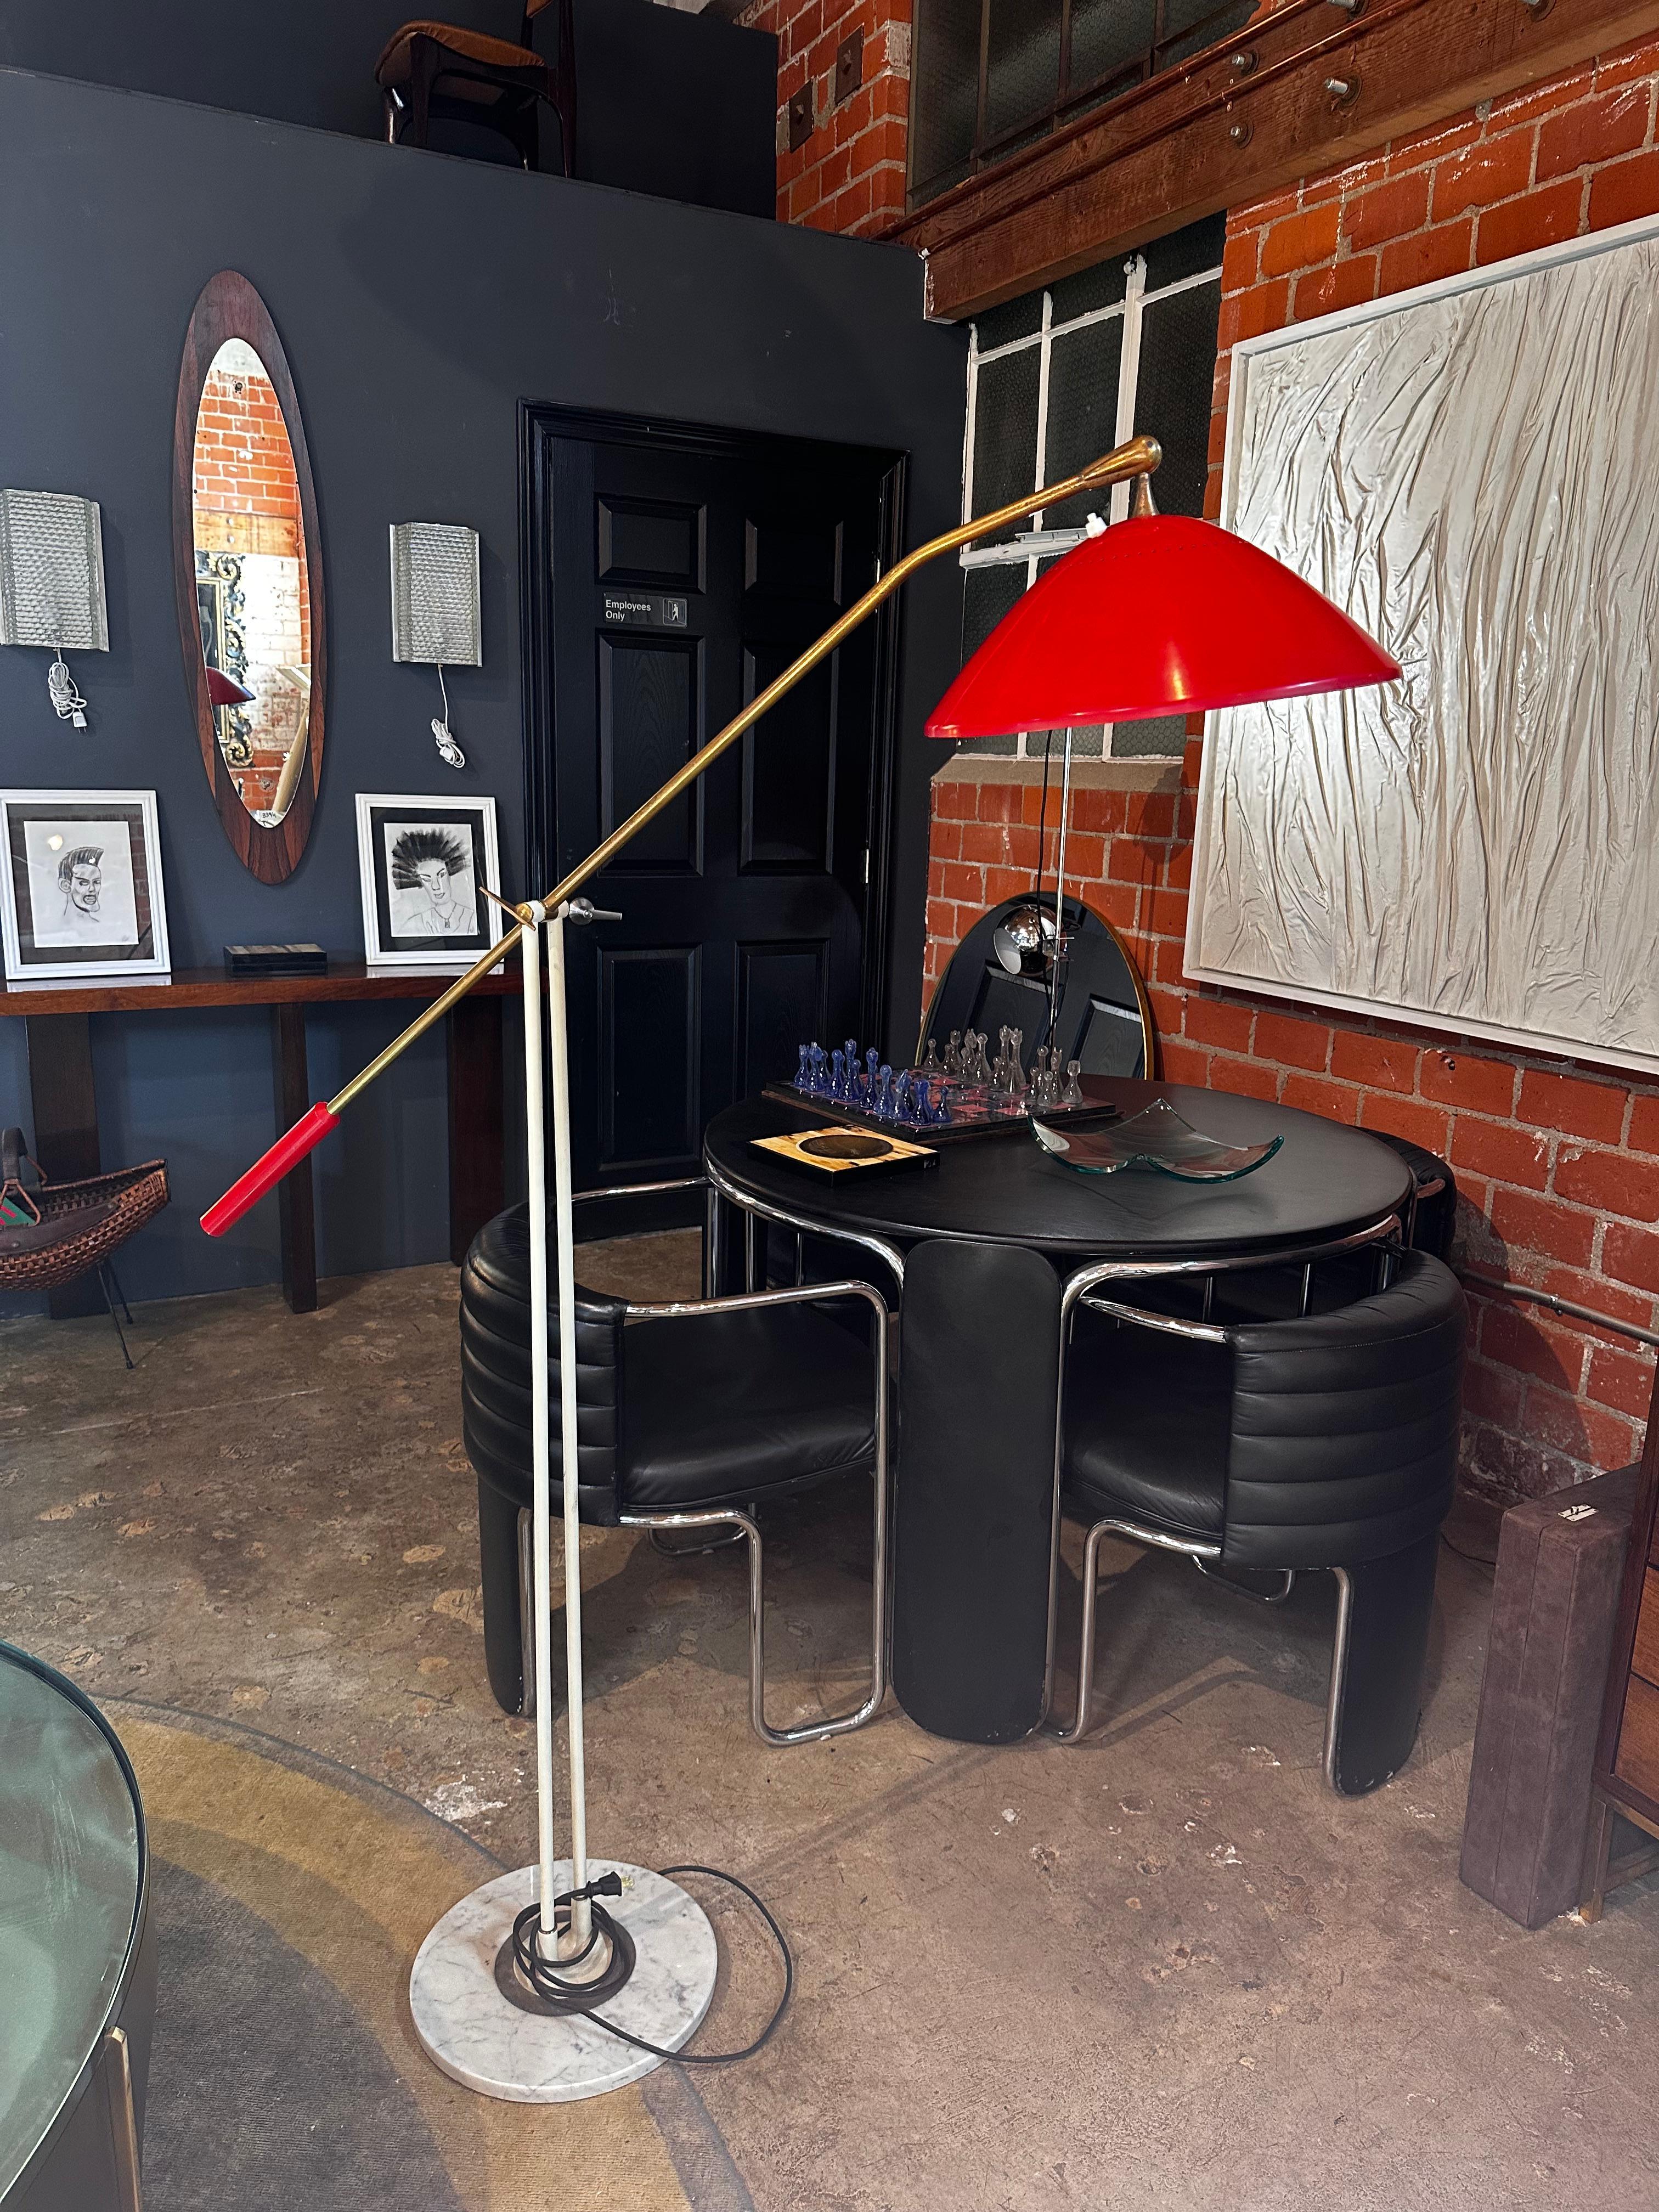 The Rare Floor Lamp by Stilnovo, crafted in Italy during the 1950s, is an exquisite piece that seamlessly blends mid-century design with functional elegance. Featuring a distinctive red shade, the lamp exudes a bold and captivating aesthetic. The